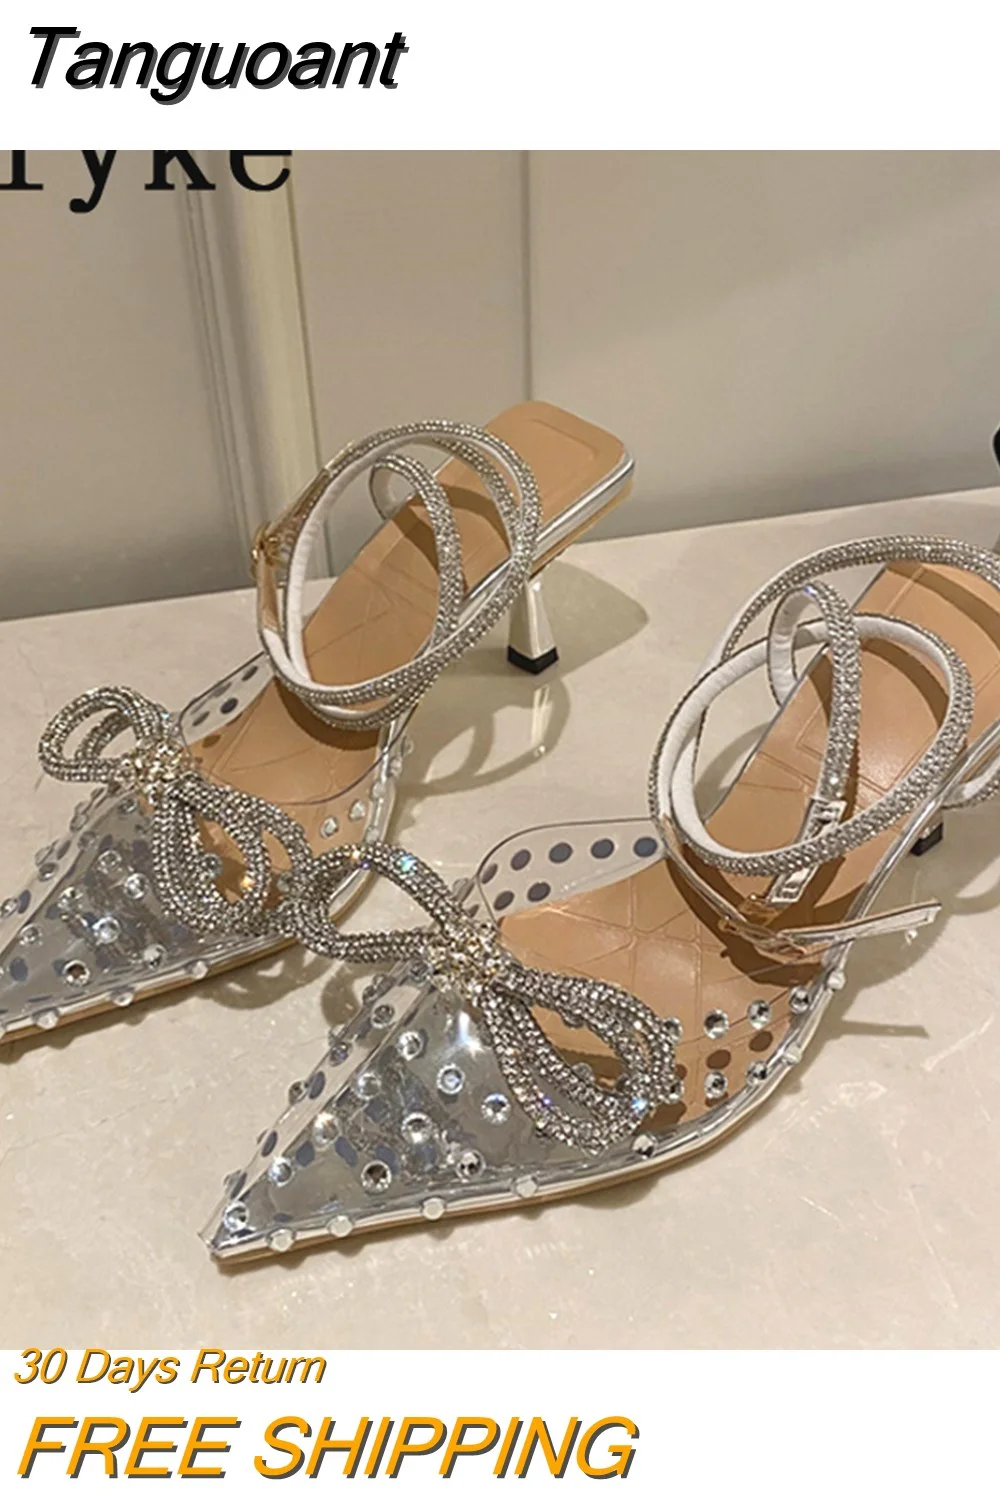 Tanguoant Elegant Crystal Bowknot Women Wedding Shoes Bride High Heels Pumps PVC Transparent Pointed Toe Ankle Strap Sandals Silver